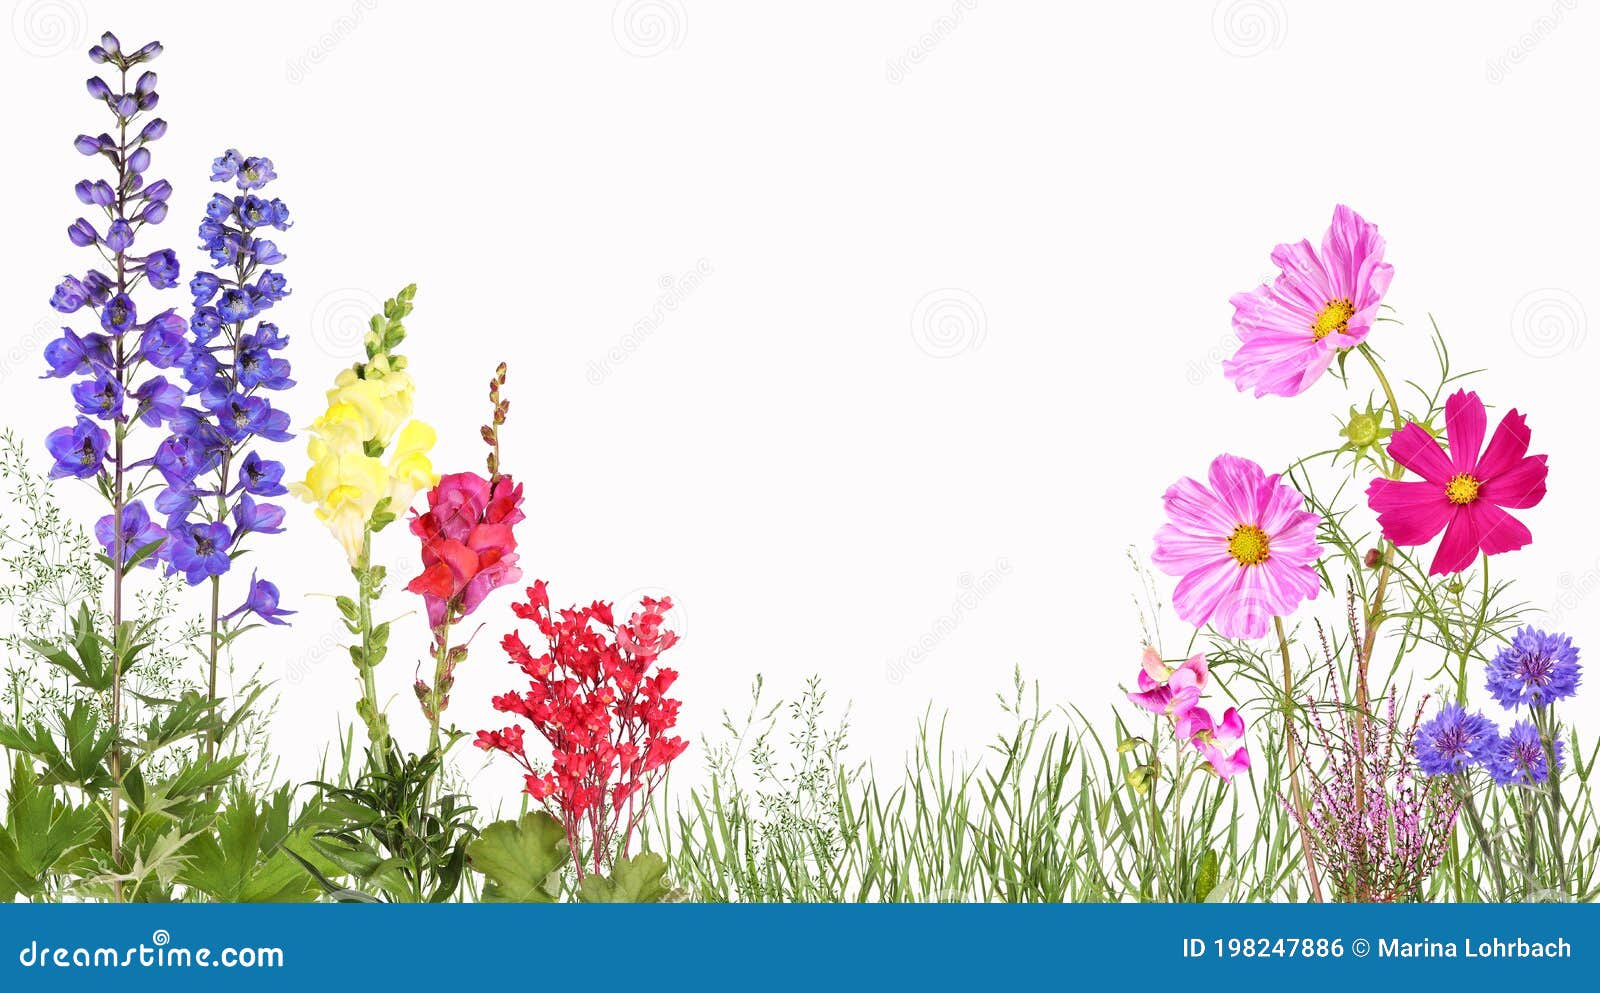 meadow with delphinium, snapdragons, cosmos flowers, cornflower and others